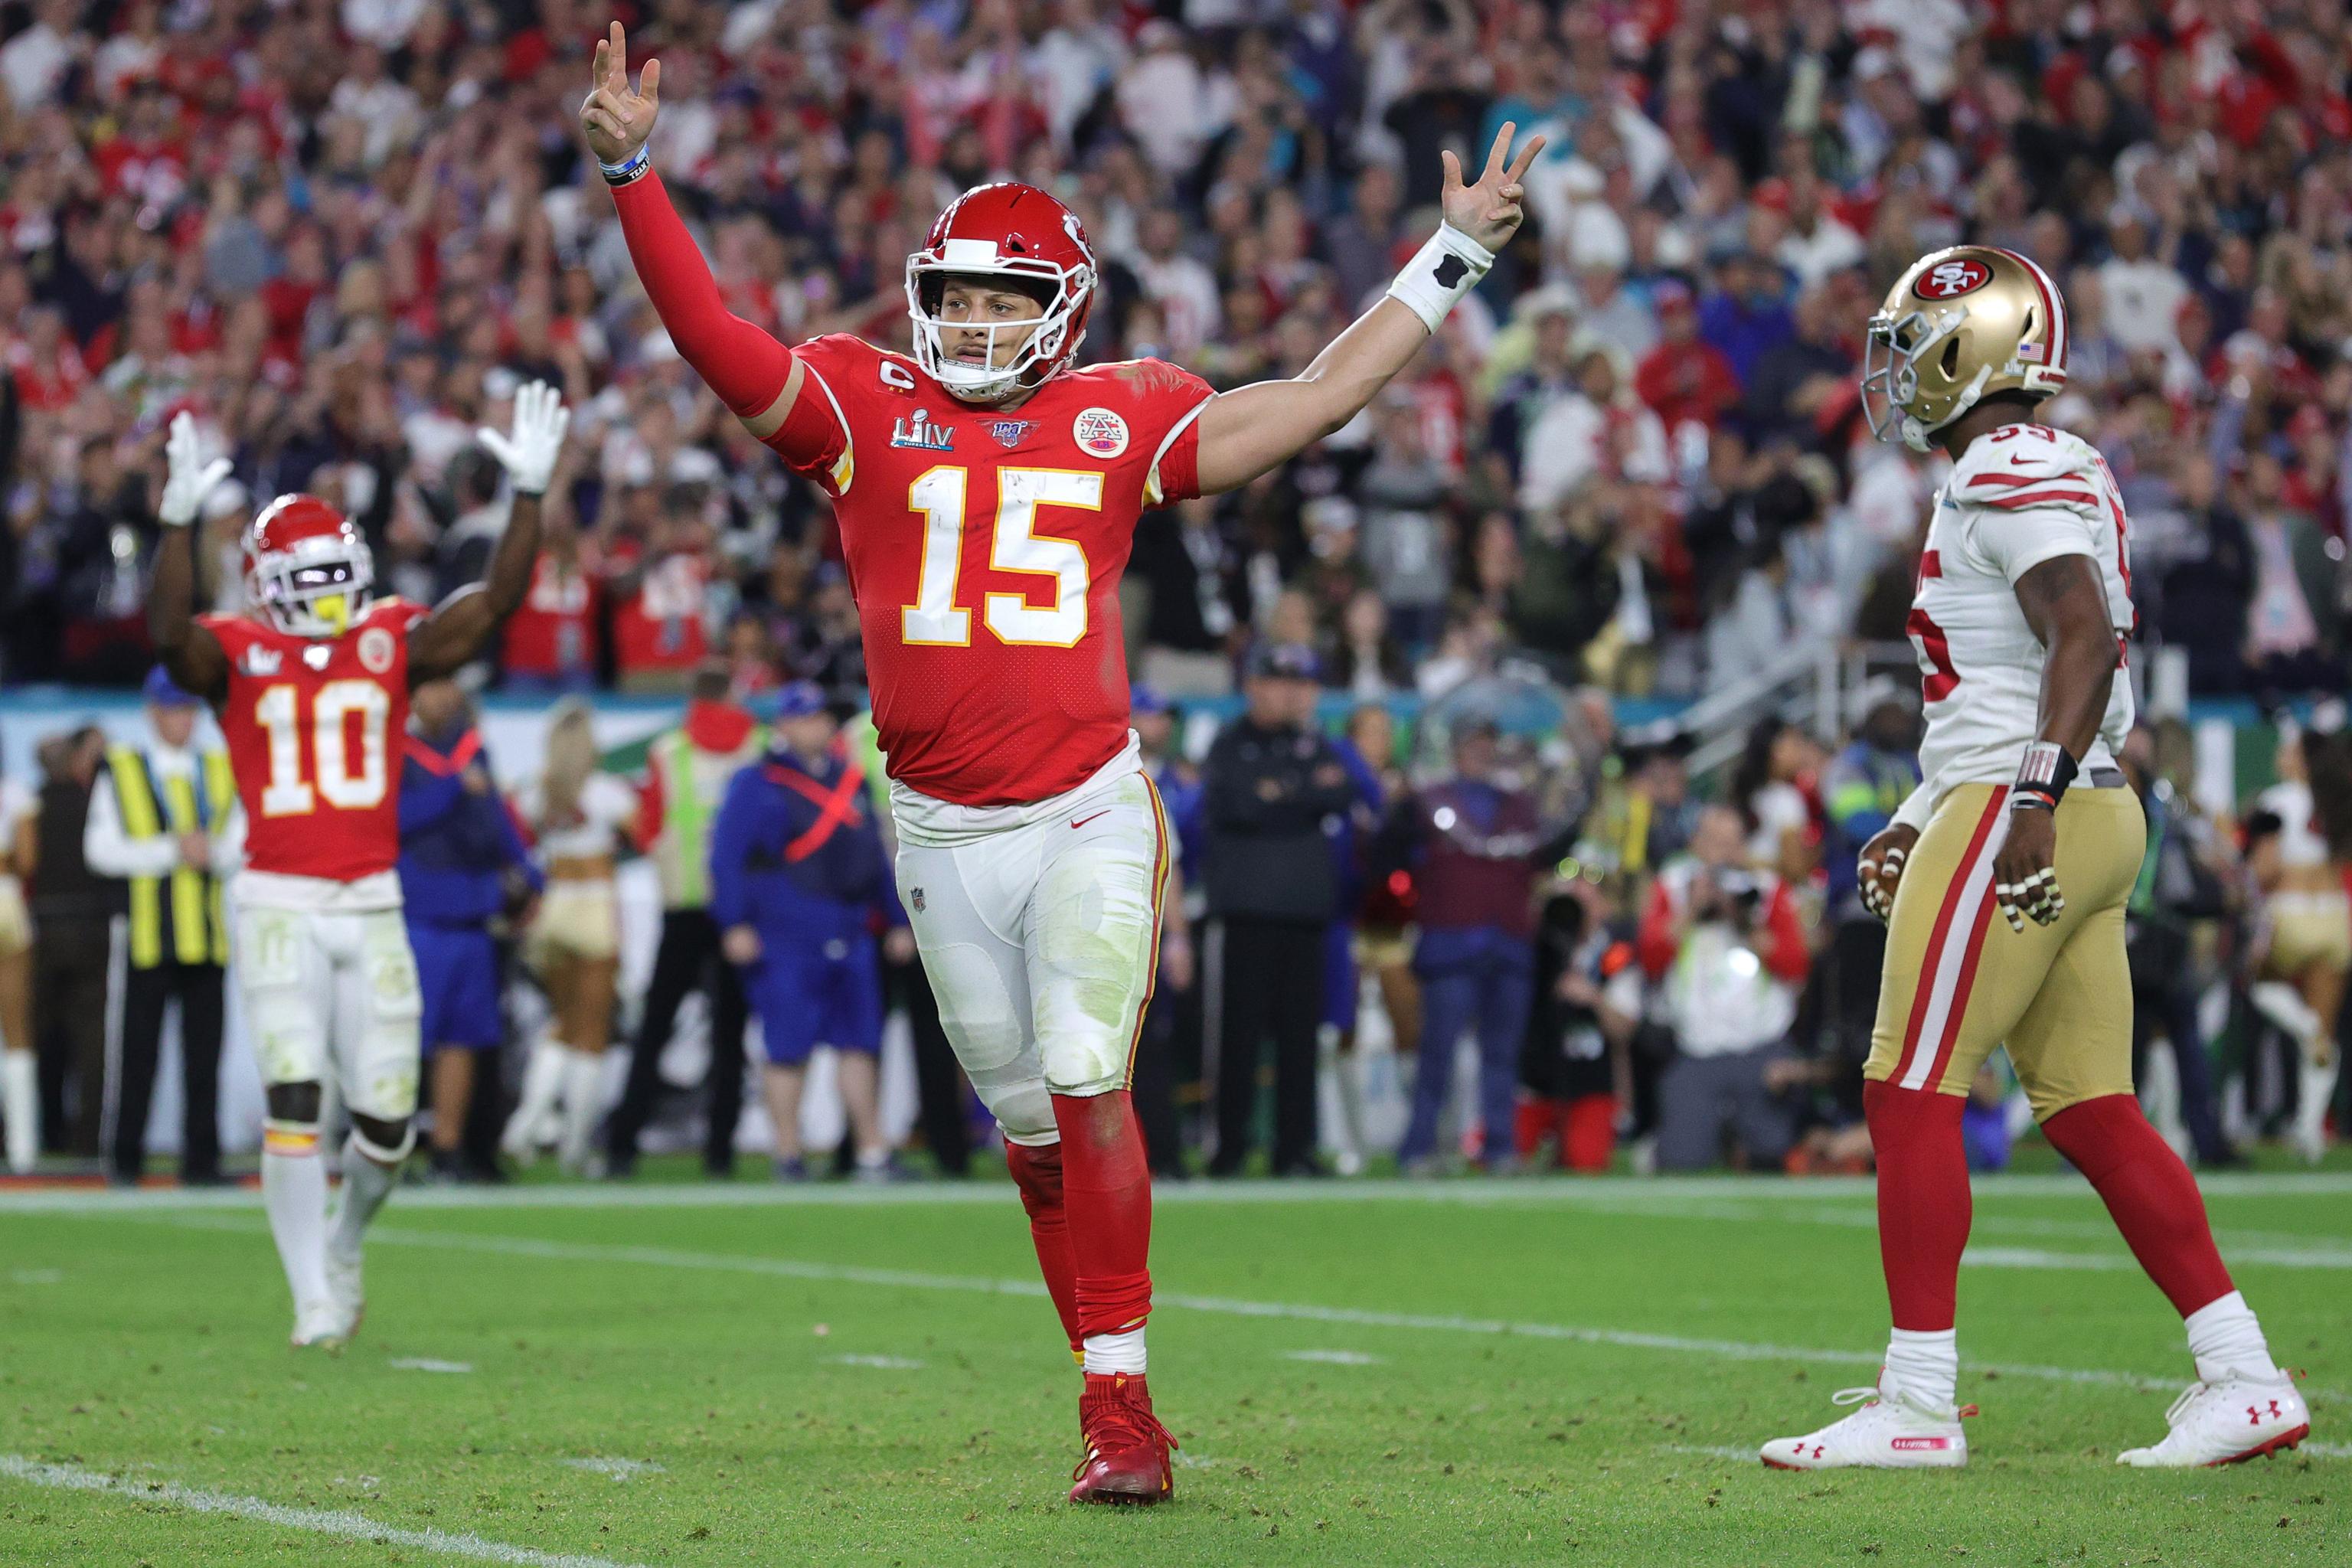 Super Bowl LIV: Mahomes leads Chiefs' rally past 49ers in Super